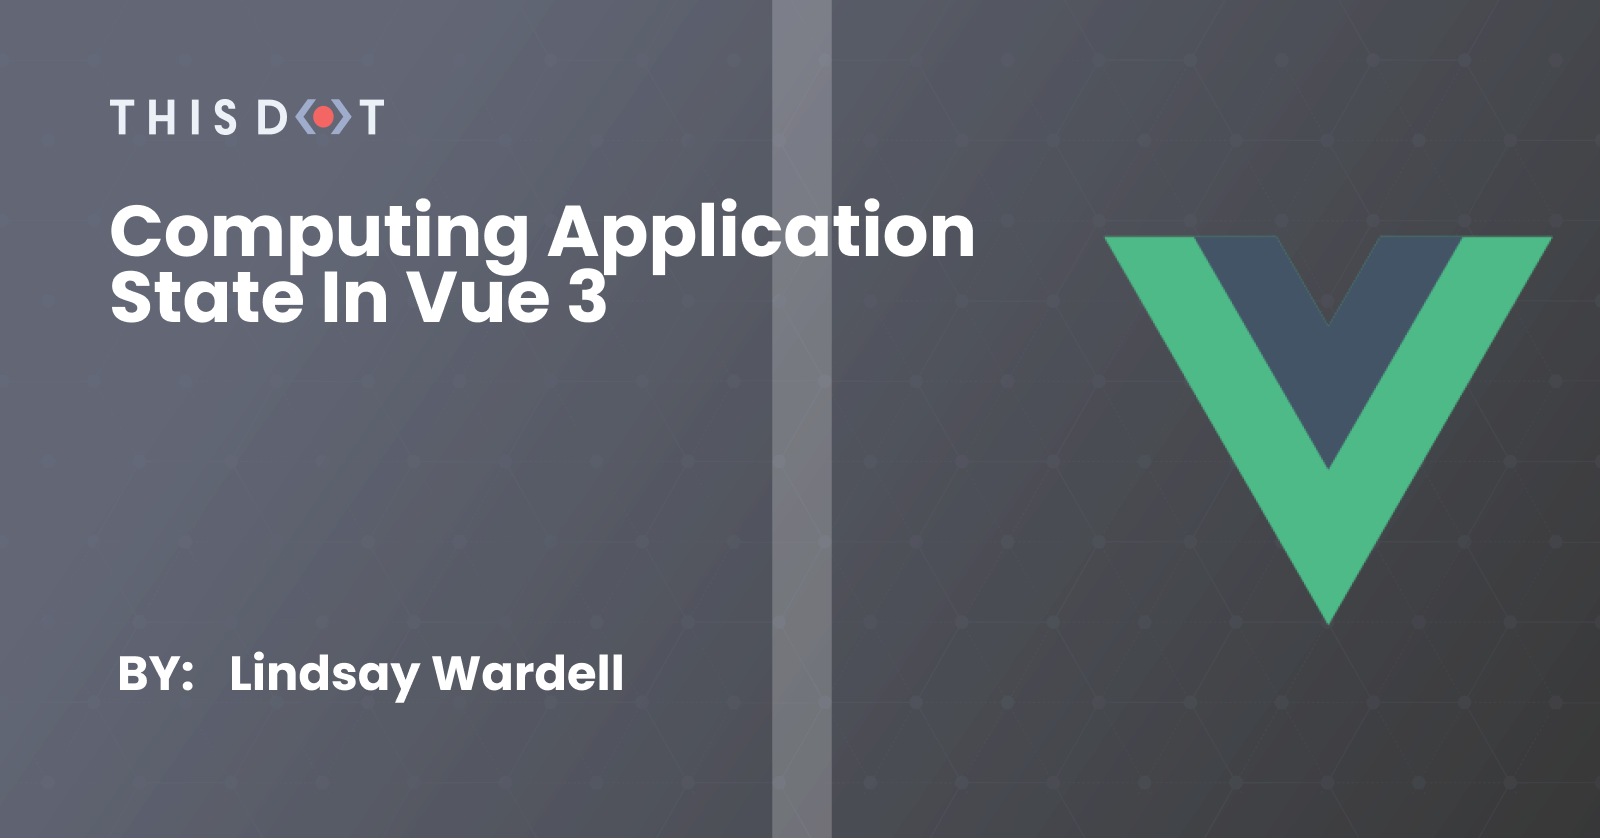 Computing Application State in Vue 3